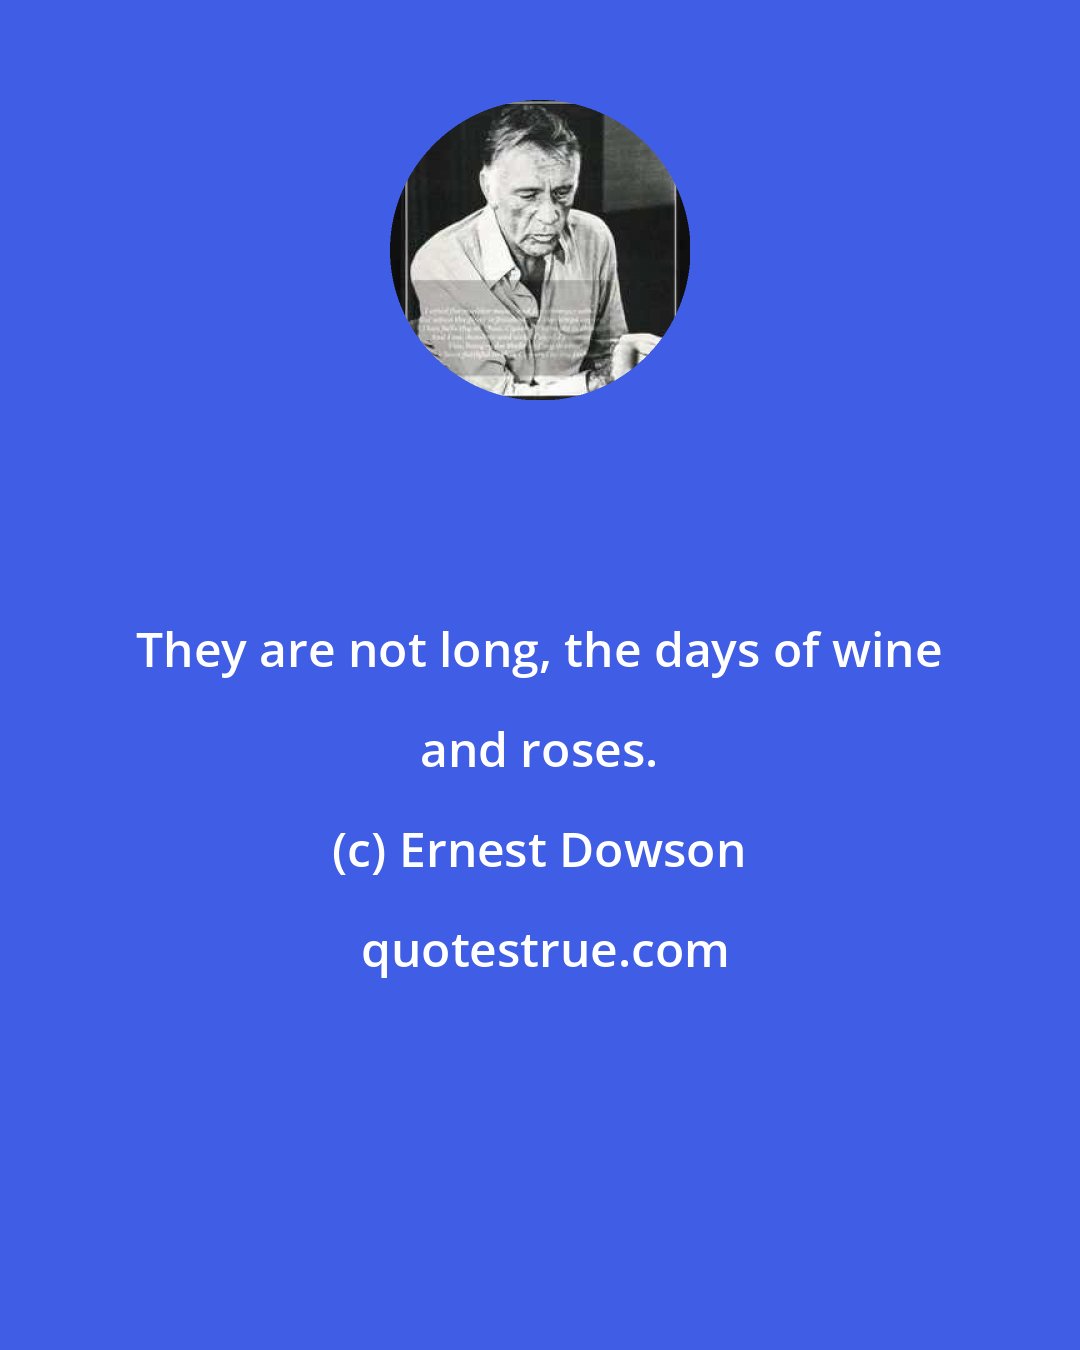 Ernest Dowson: They are not long, the days of wine and roses.